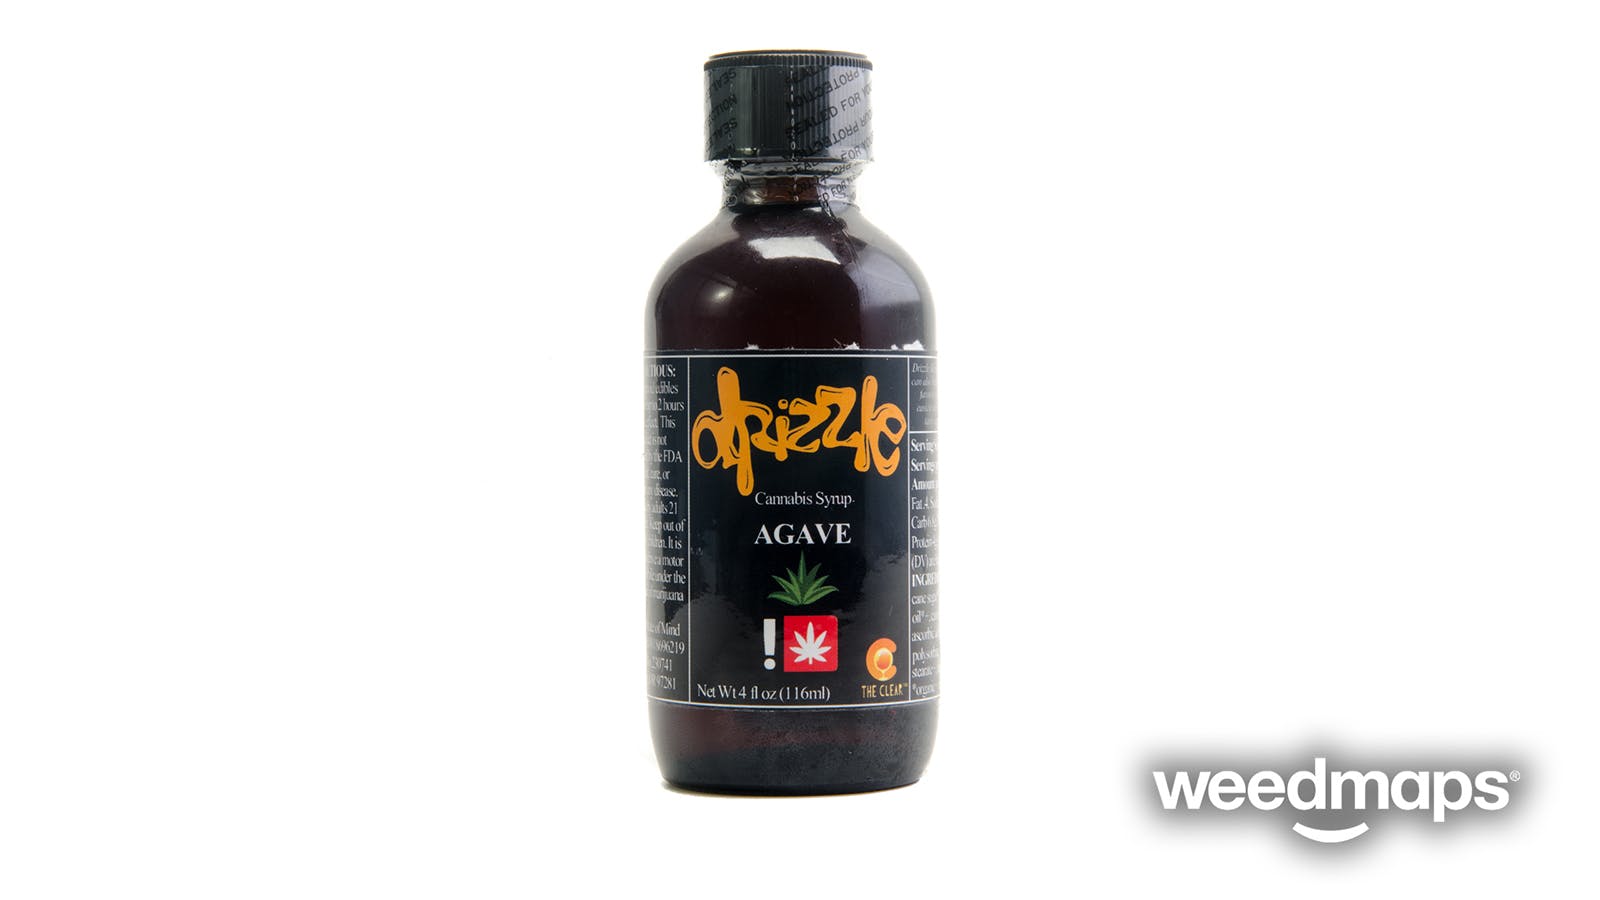 marijuana-dispensaries-1291-west-7th-ave-eugene-drizzle-syrup-agave